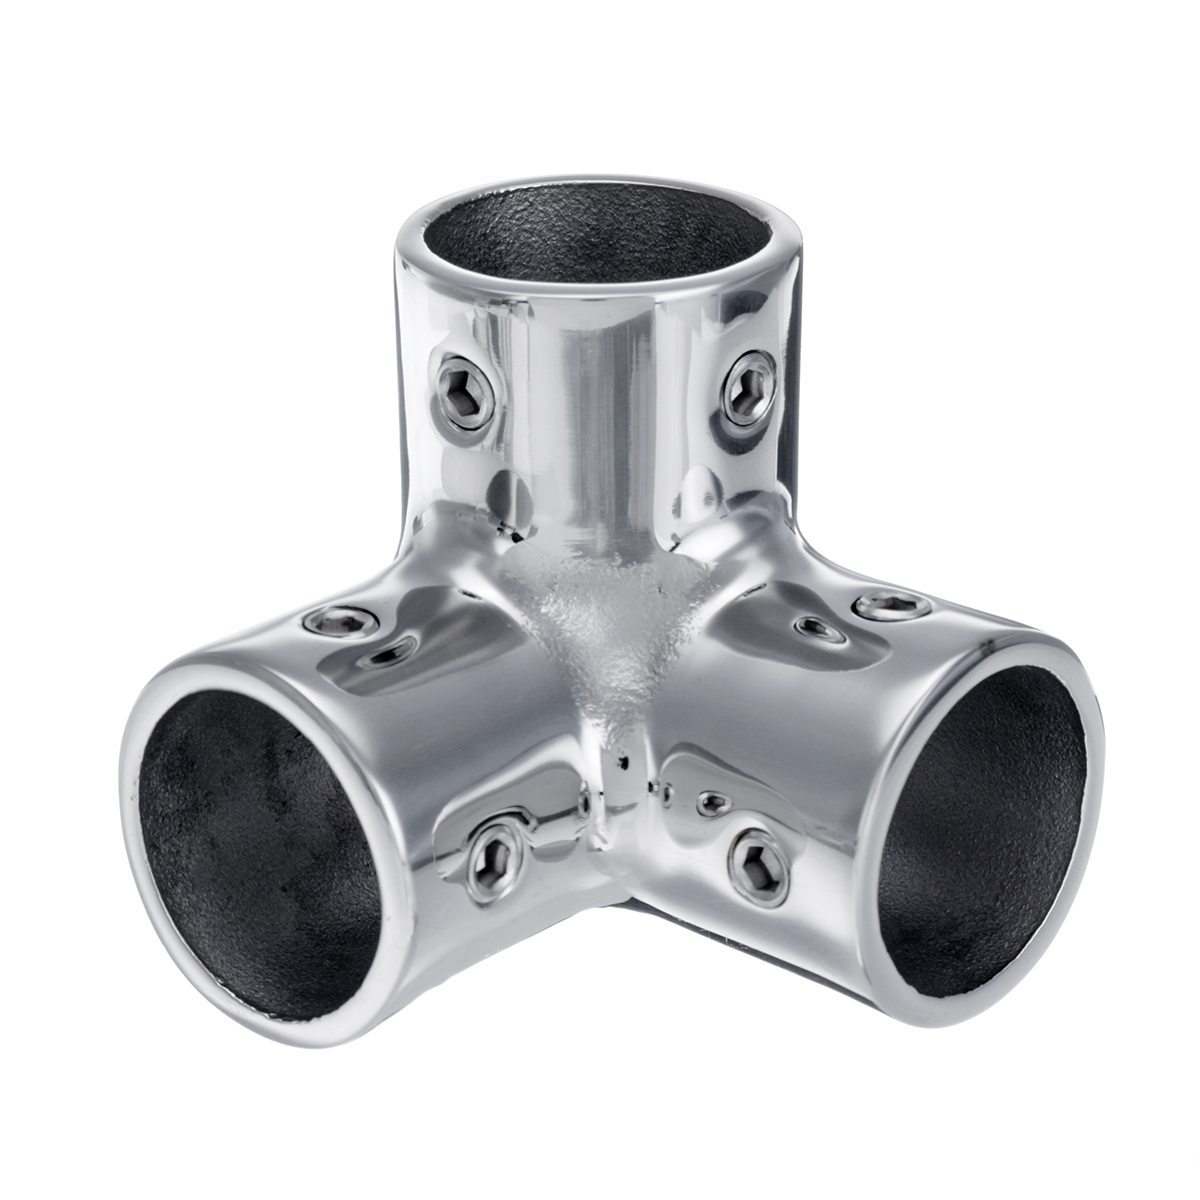 

22mm/25mm 3 Way 90° Angle Pipes Fittings Connector 316 Stainless Steel For Boat Yacht Marine